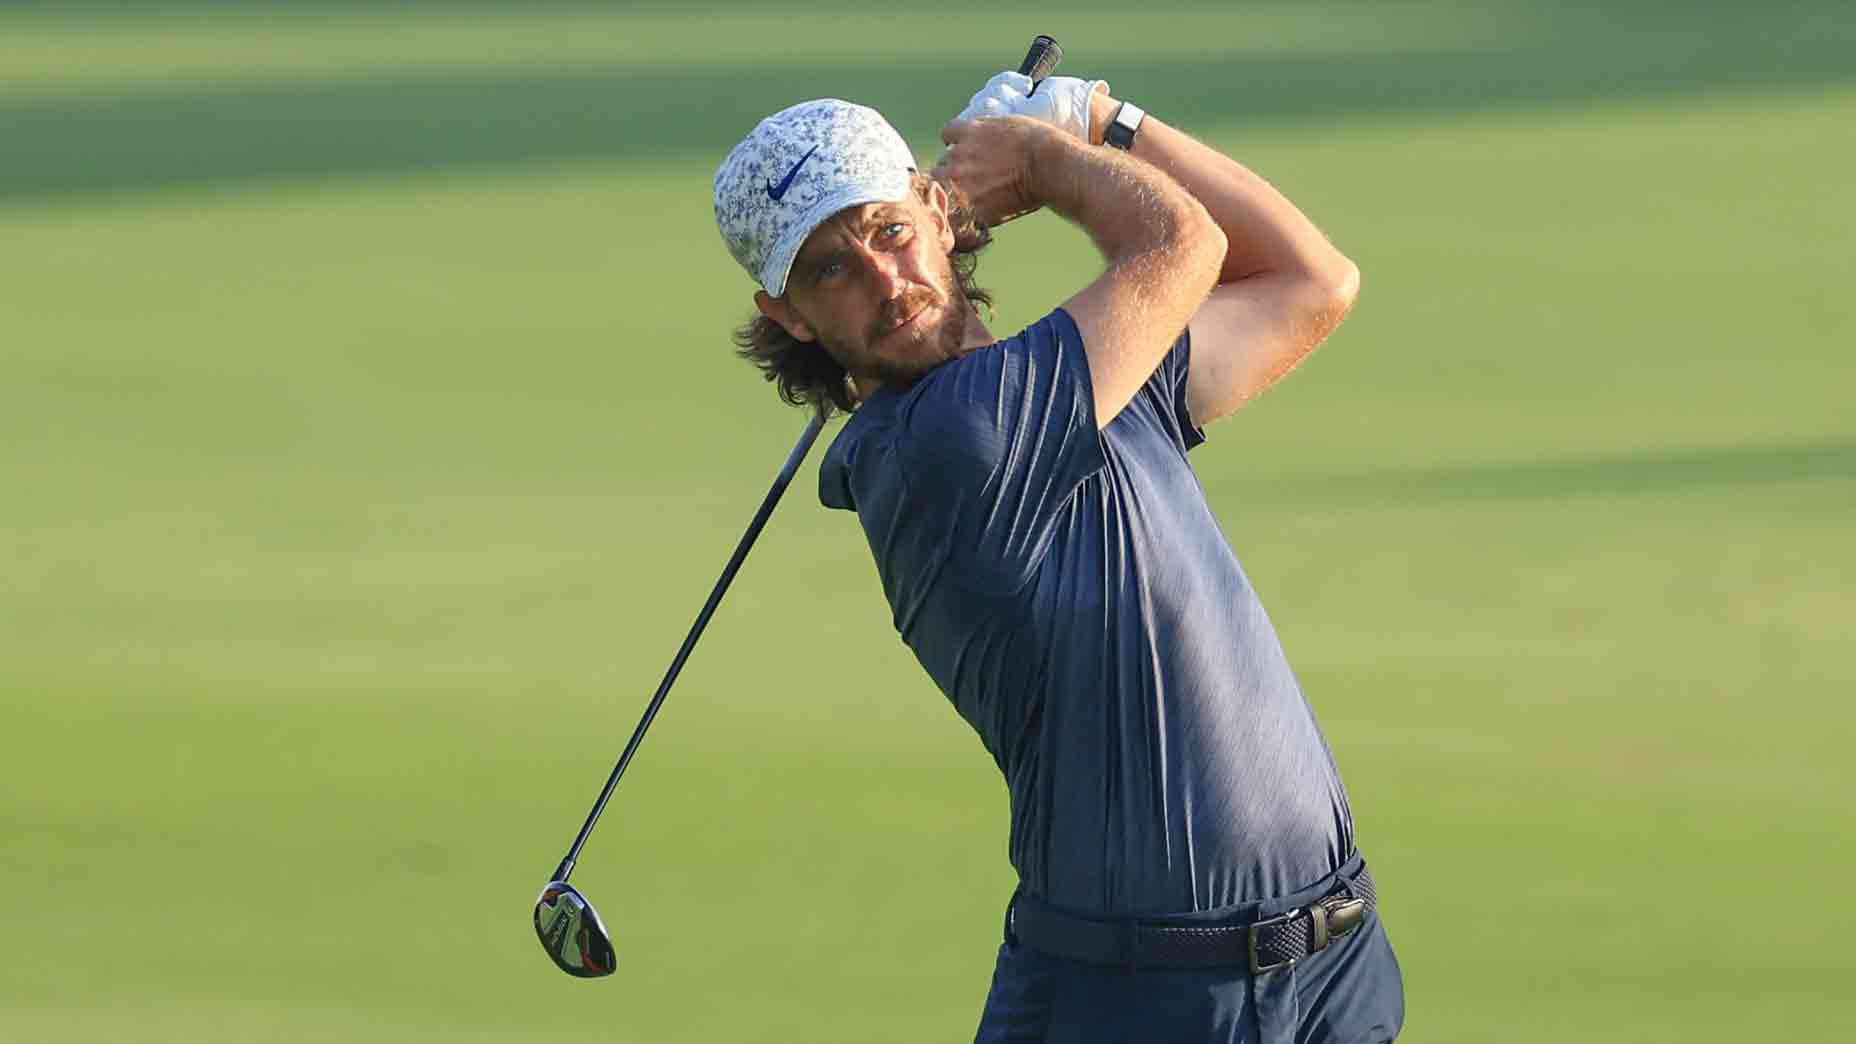 Tommy Fleetwood shares his tips to help you avoid tops and chunks when using your fairway woods off the deck